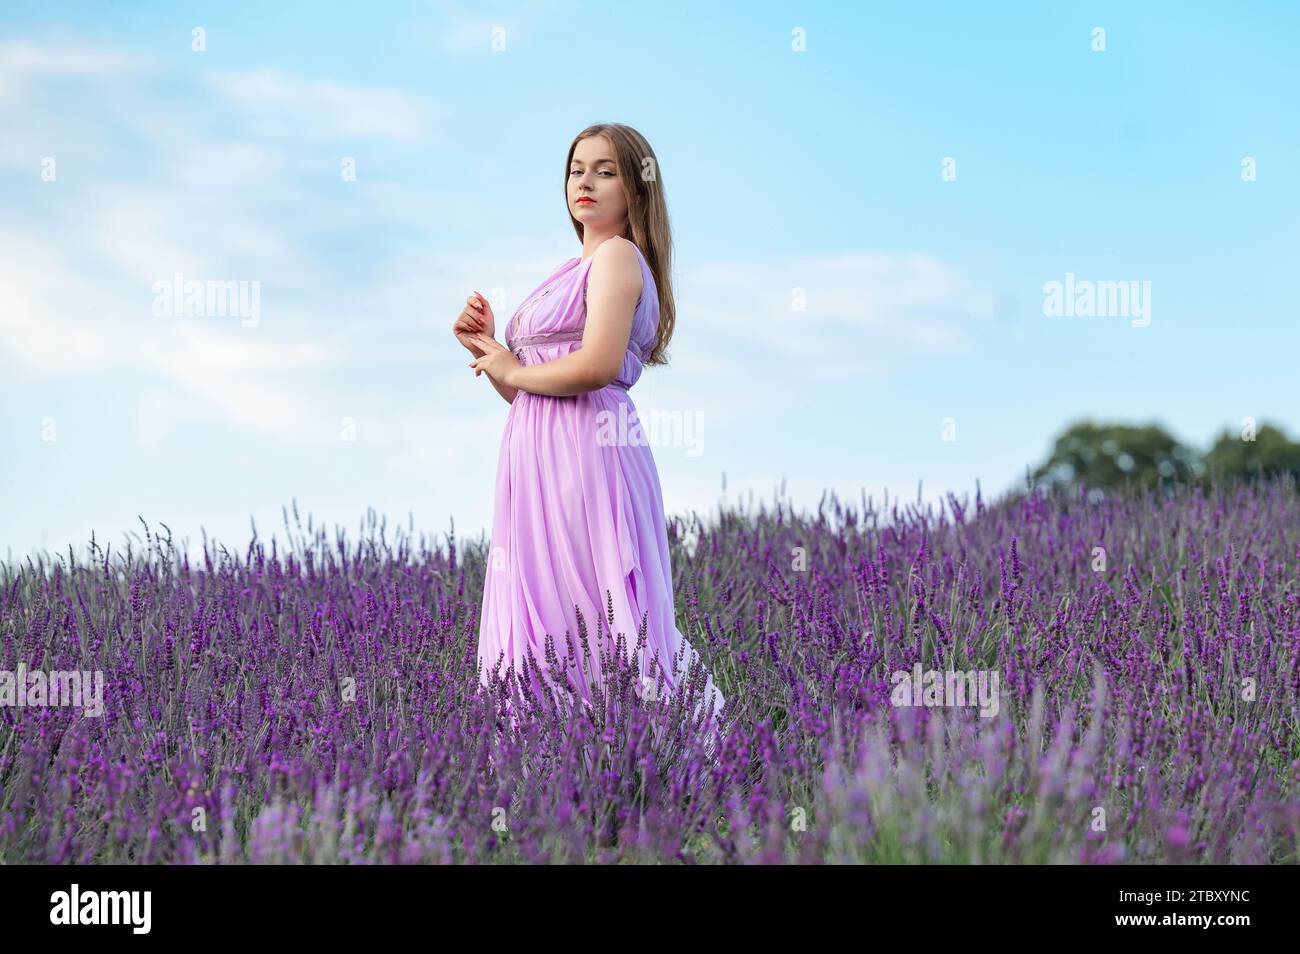 Ivano-Frankivsk, Ukraine August 5, 2023: a girl in a long purple dress walks through a lavender field, posing during a photo shoot in a lavender field Stock Photo